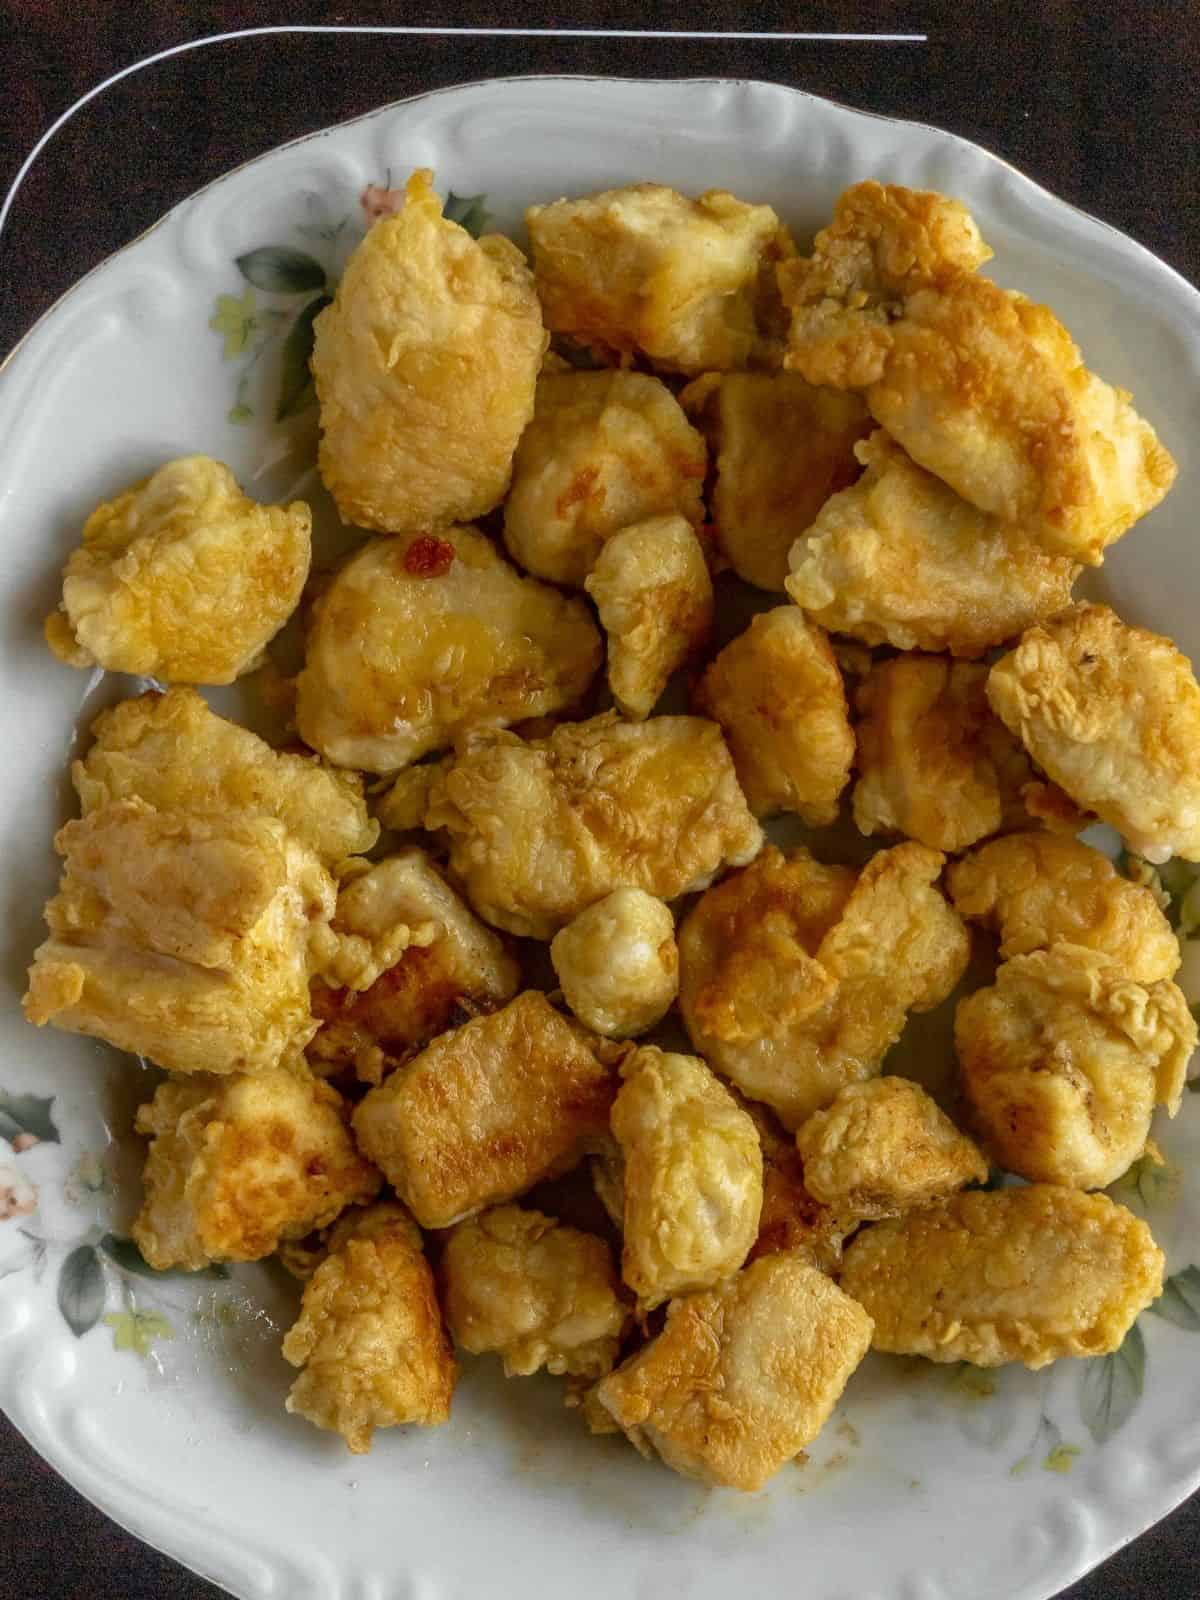 cooked breaded chicken cubes on plate.